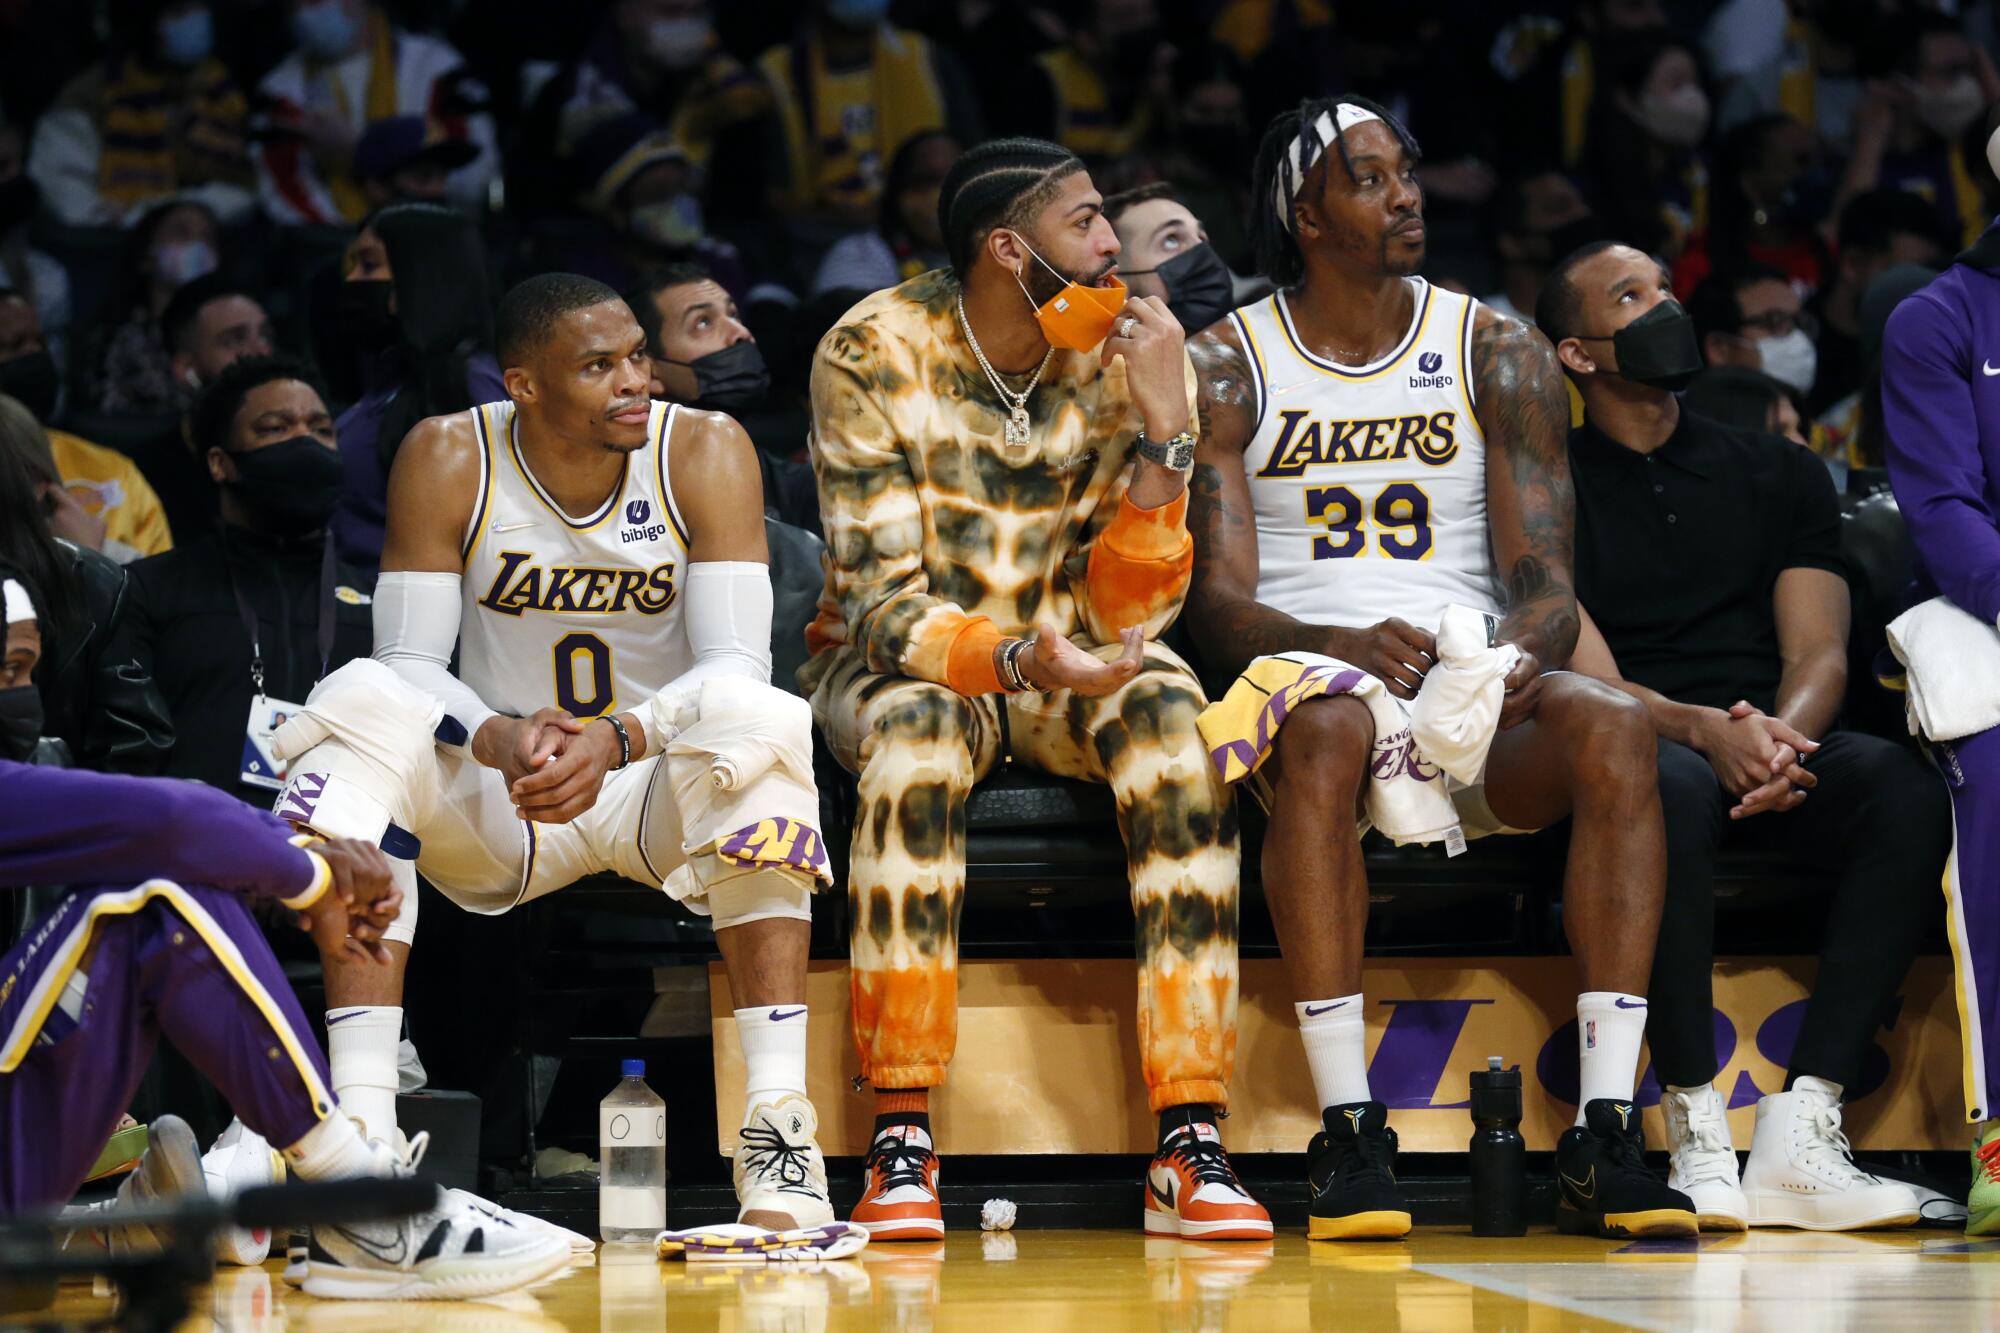 Lakers guard Russell Westbrook sits next to injured forward Anthony Davis and center Dwight Howard on the bench.